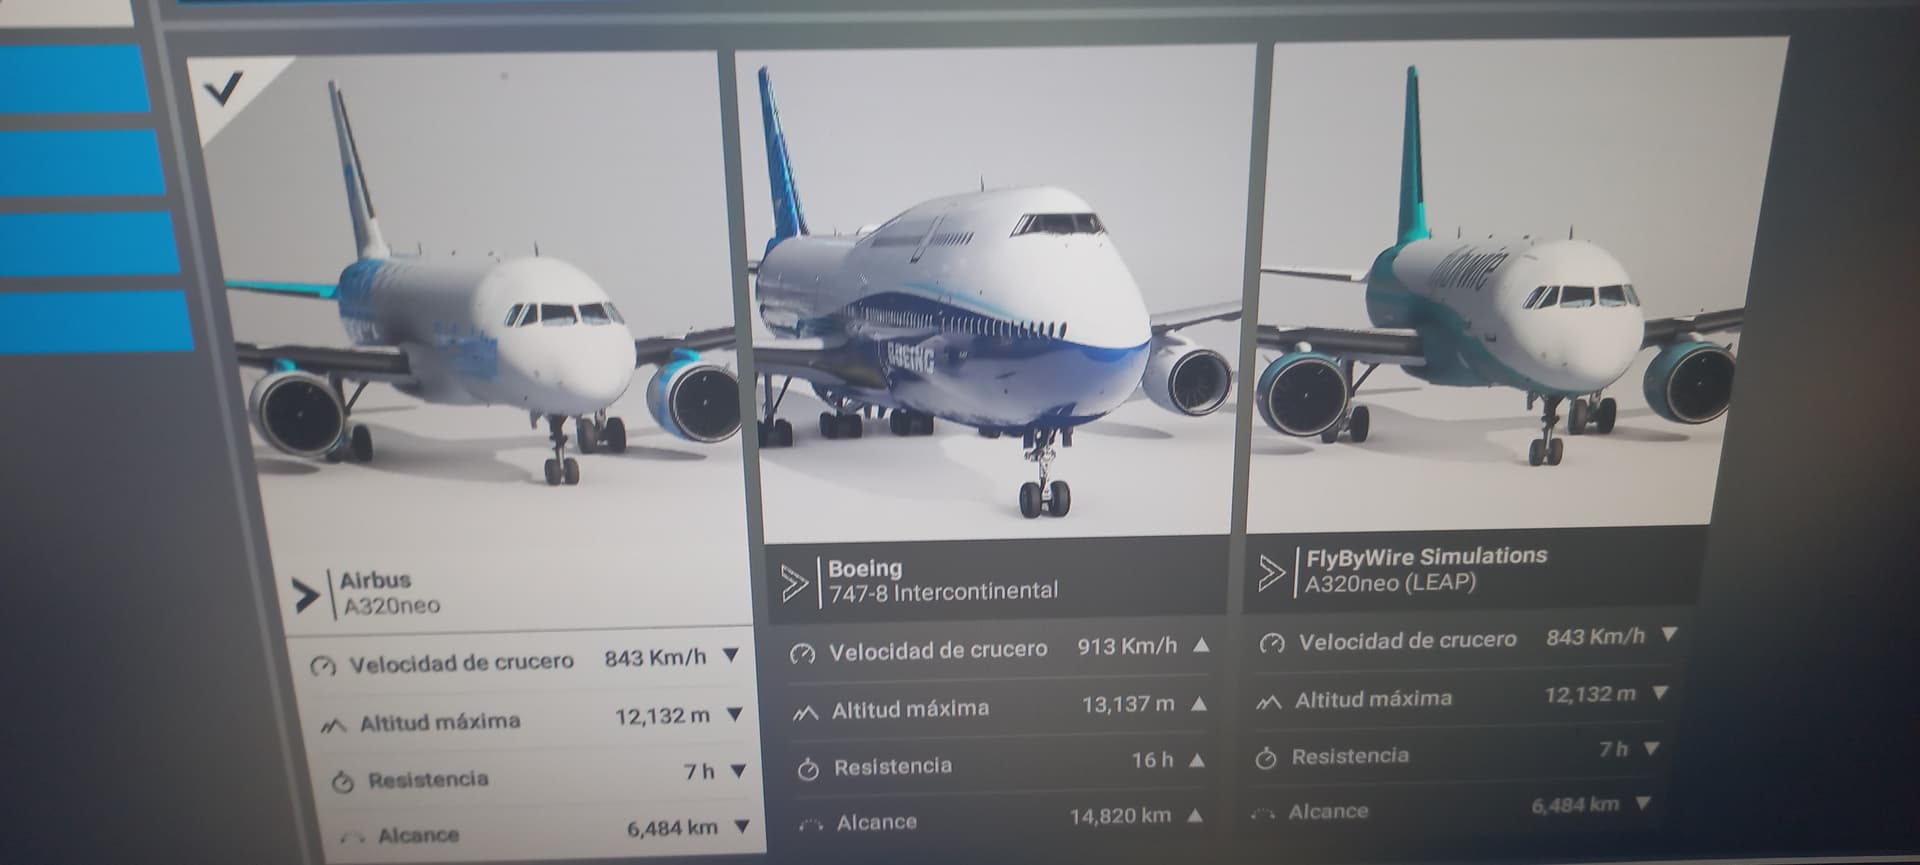 Stream Download RFS Real Flight Simulator APK 2.0 3 and Experience